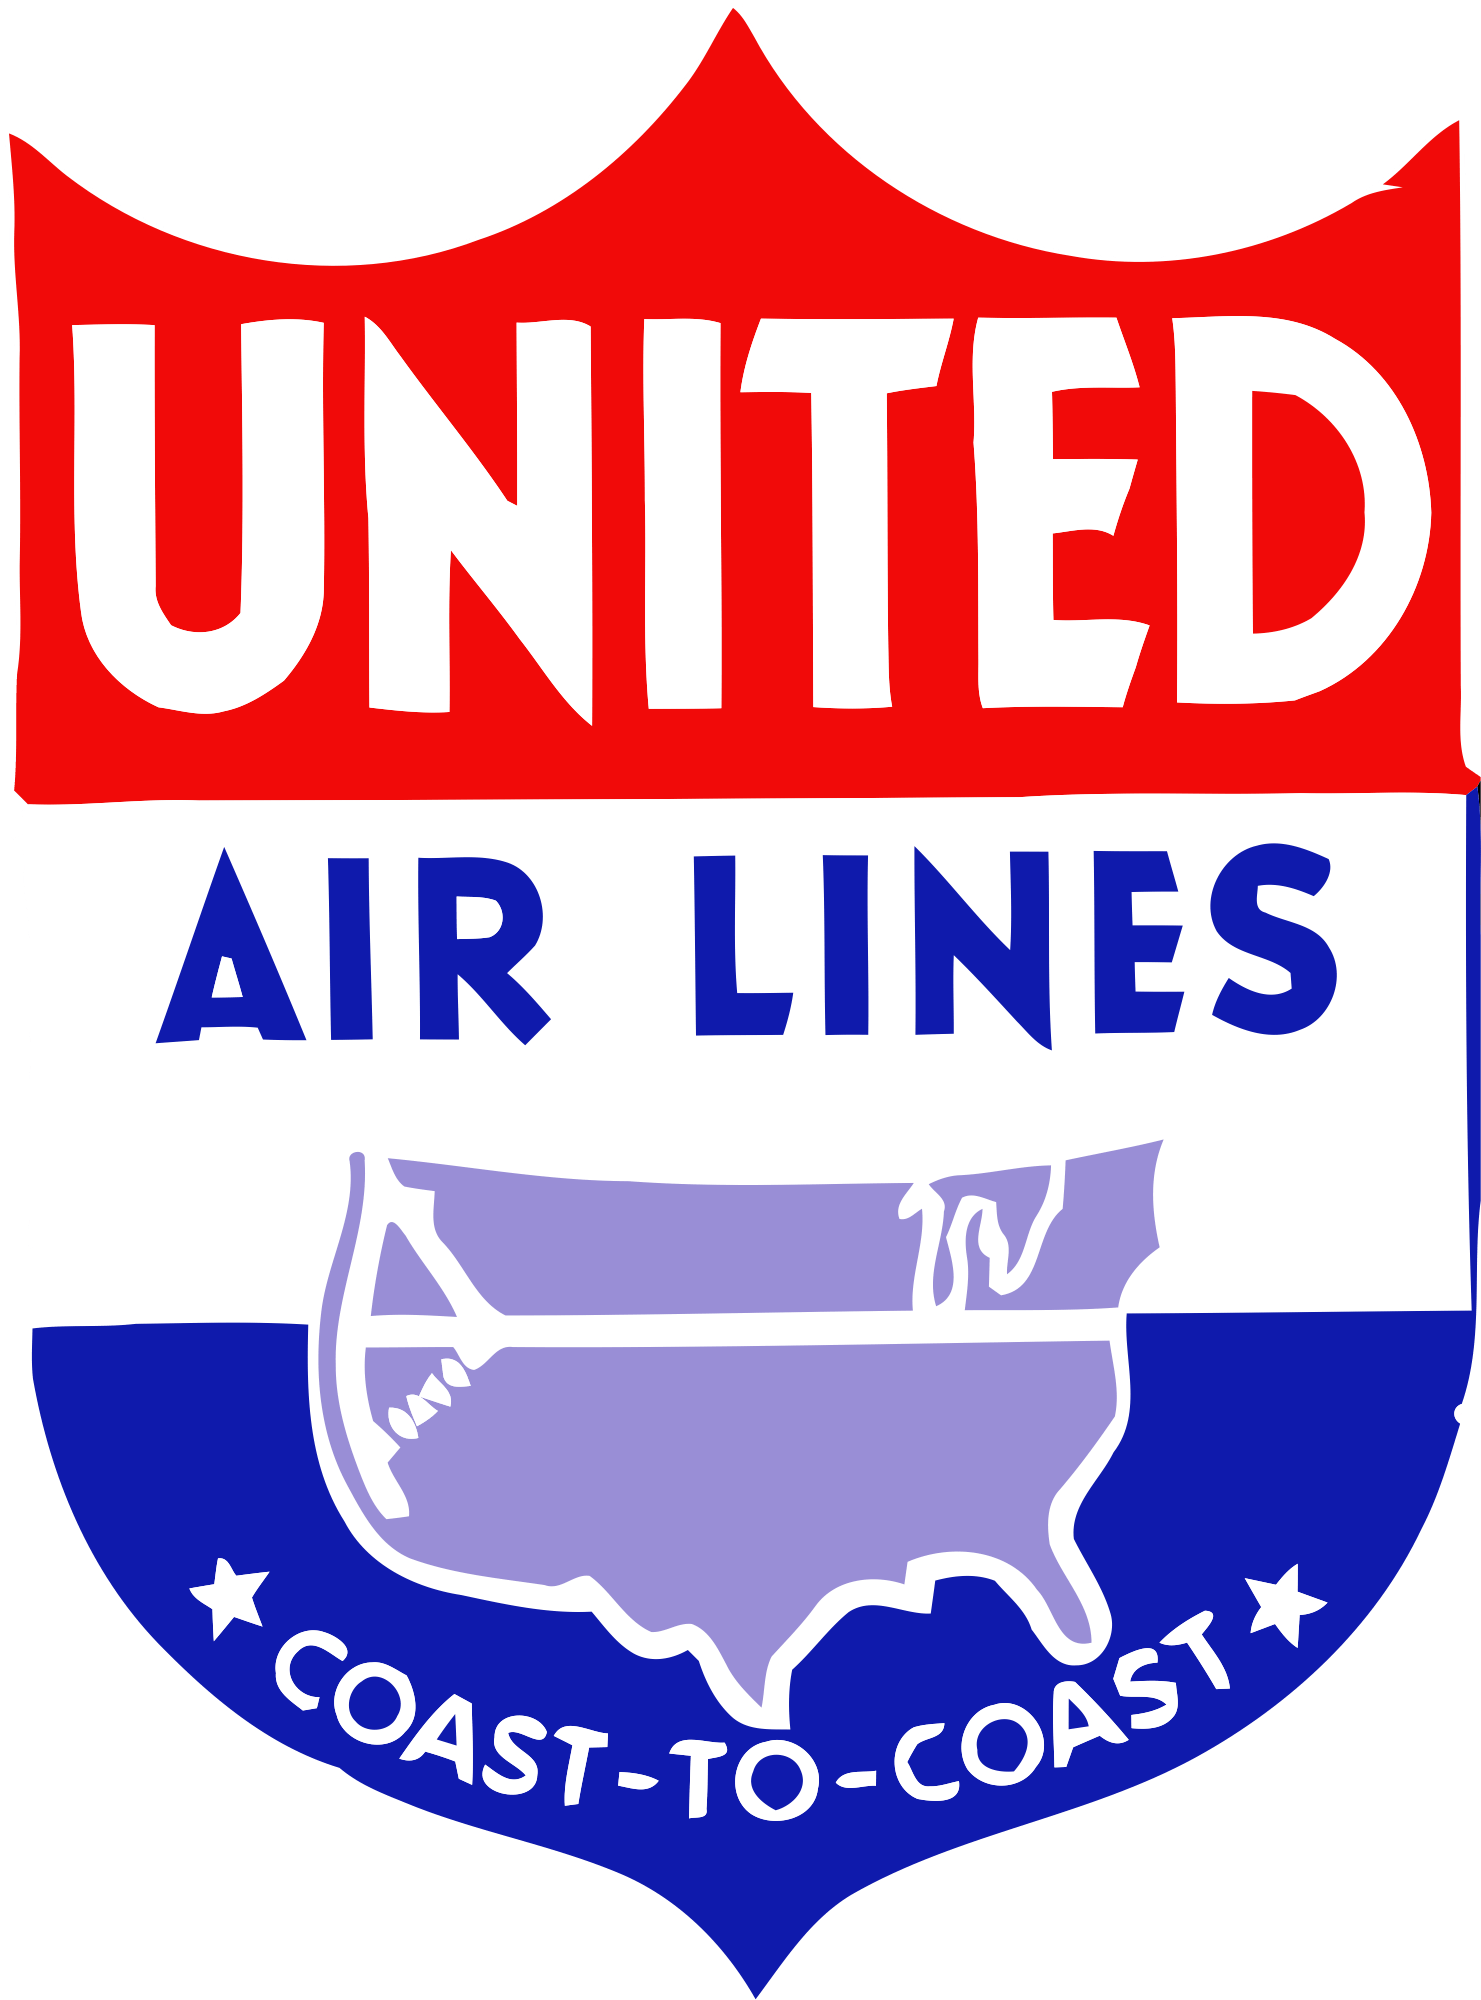 Vintage Airline Logo - United Airlines | Logopedia | FANDOM powered by Wikia